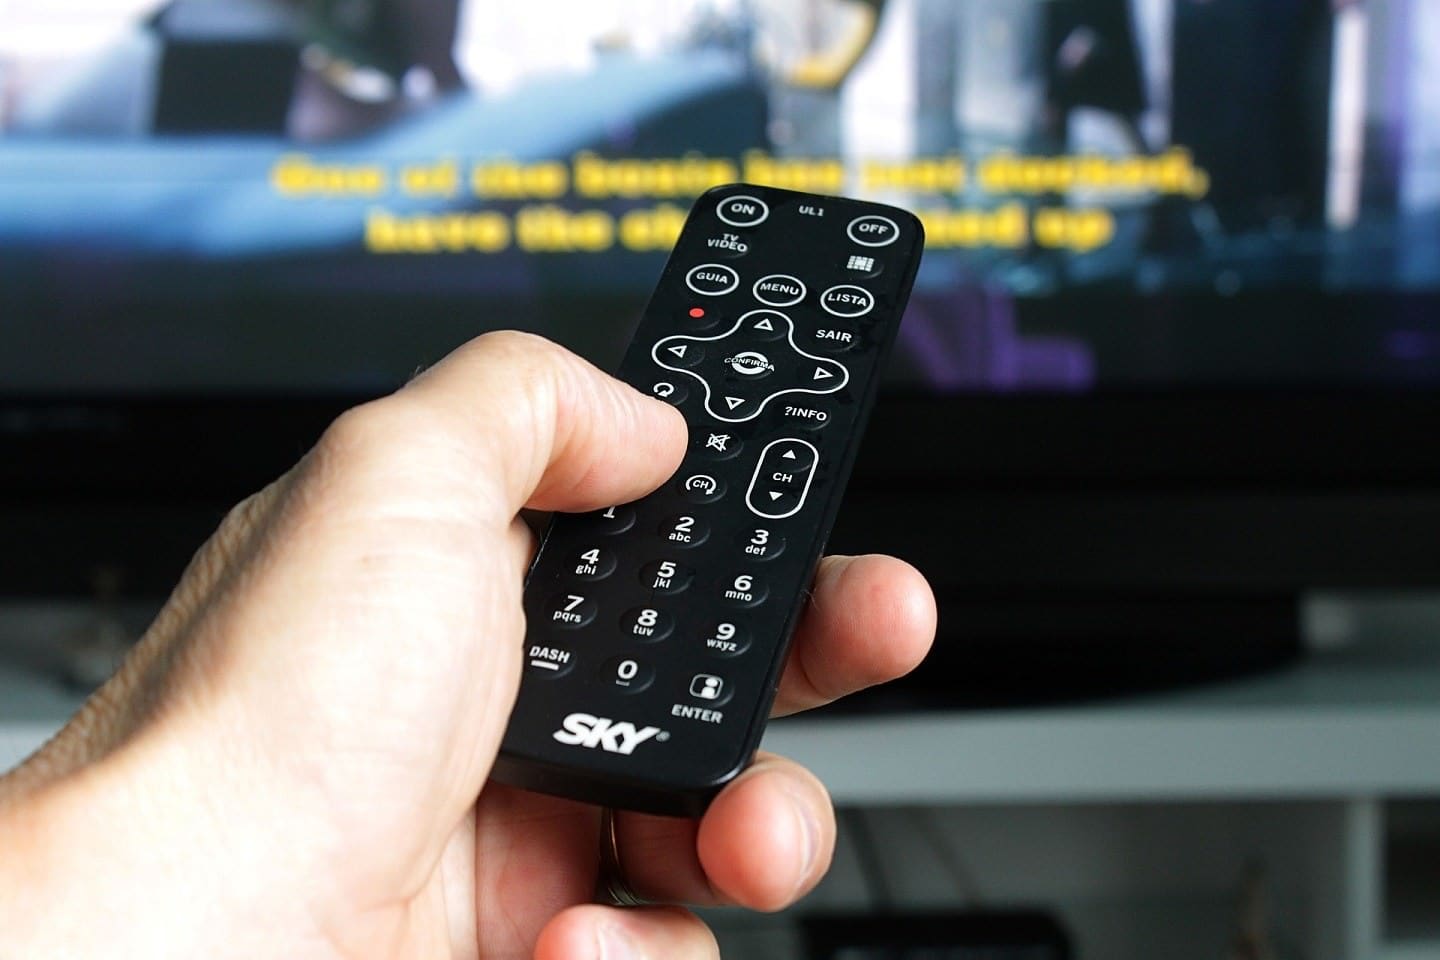 Viewer pointing remote control towards television set showing captions